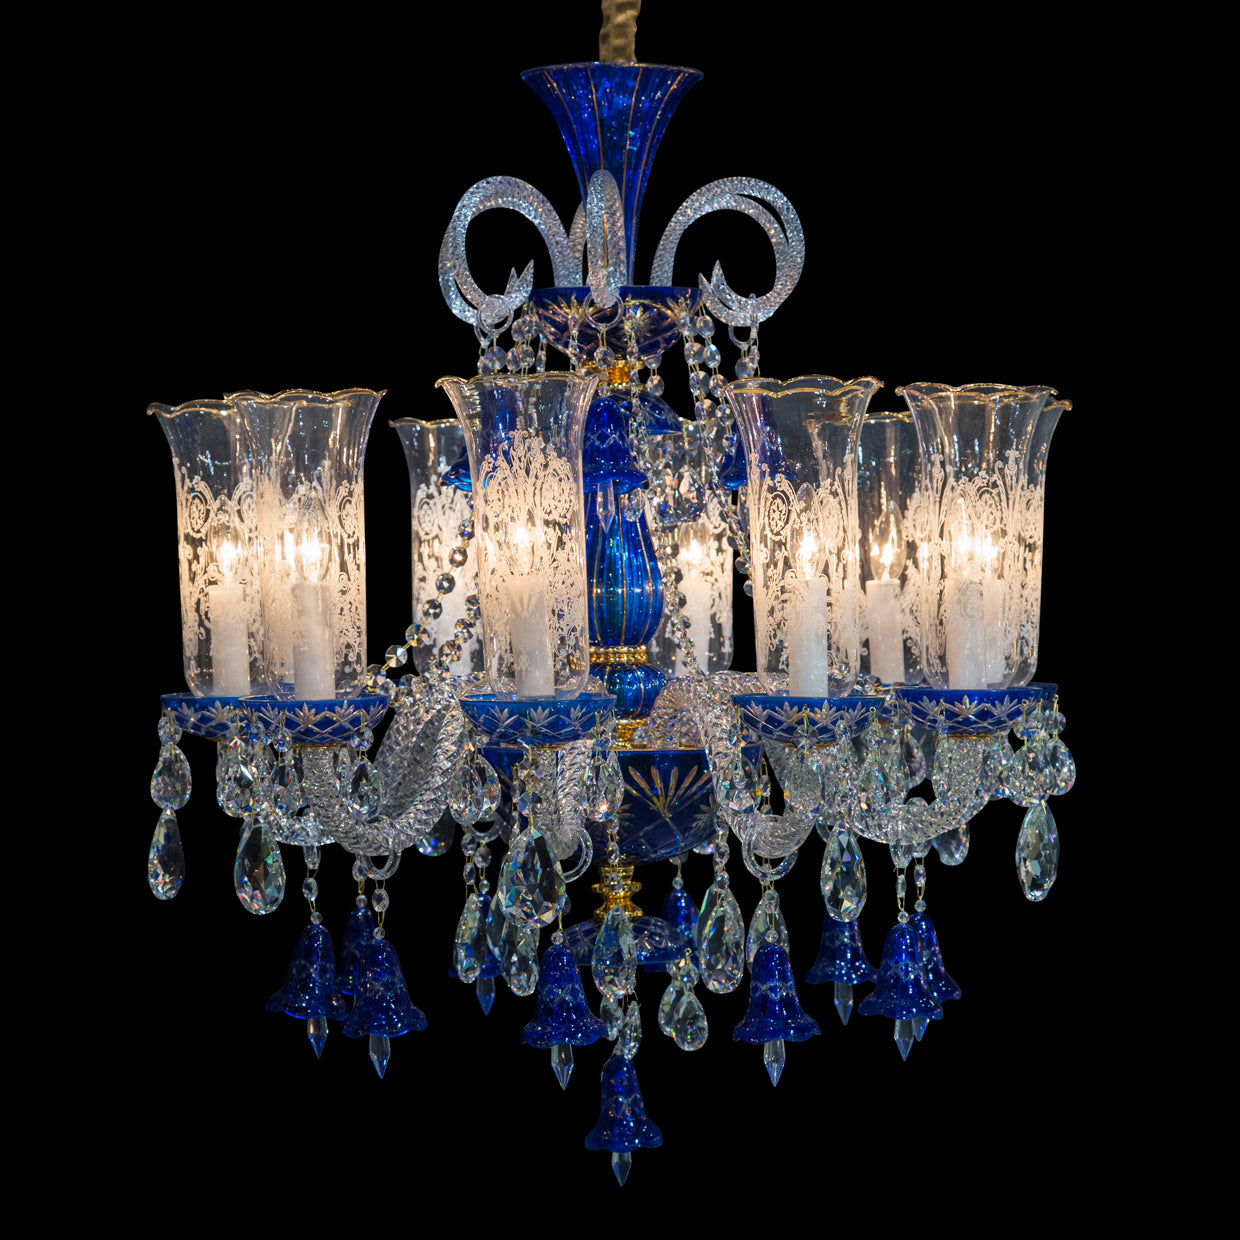 Winter Palace chandelier, light chandelier, Gold chandelier, Antique-inspired chandelier, Etched glass hurricane shades, Gold accents, Clear crystal beads, Delicate bell drops, Red or blue accents, Luxury lighting fixture, dream art, Michael amini